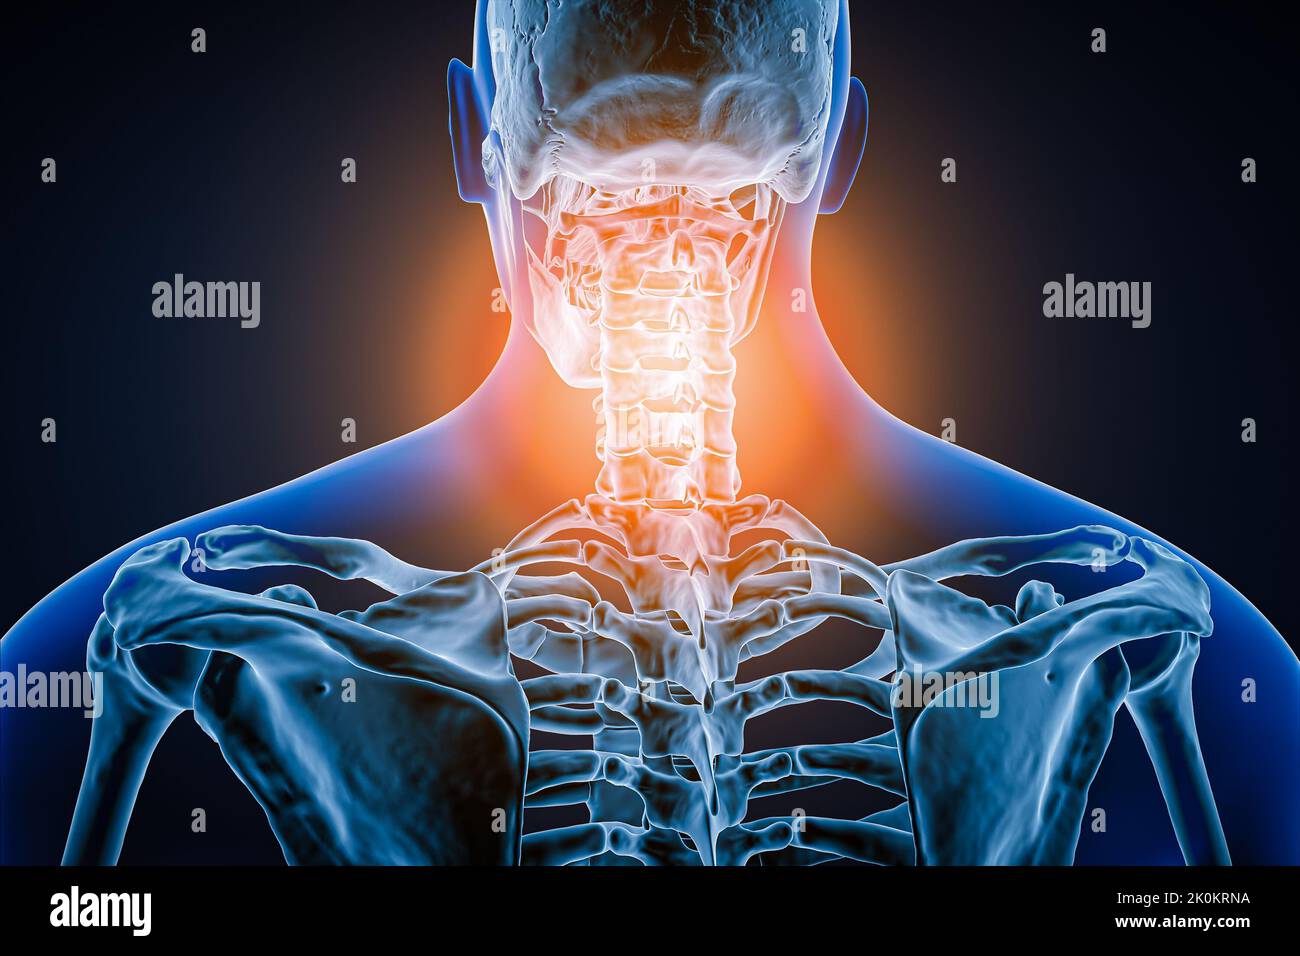 Posterior or back view of human spine or spinal column with inflammation or injury 3D rendering illustration. Pathology, backbone pain, anatomy, cervi Stock Photo